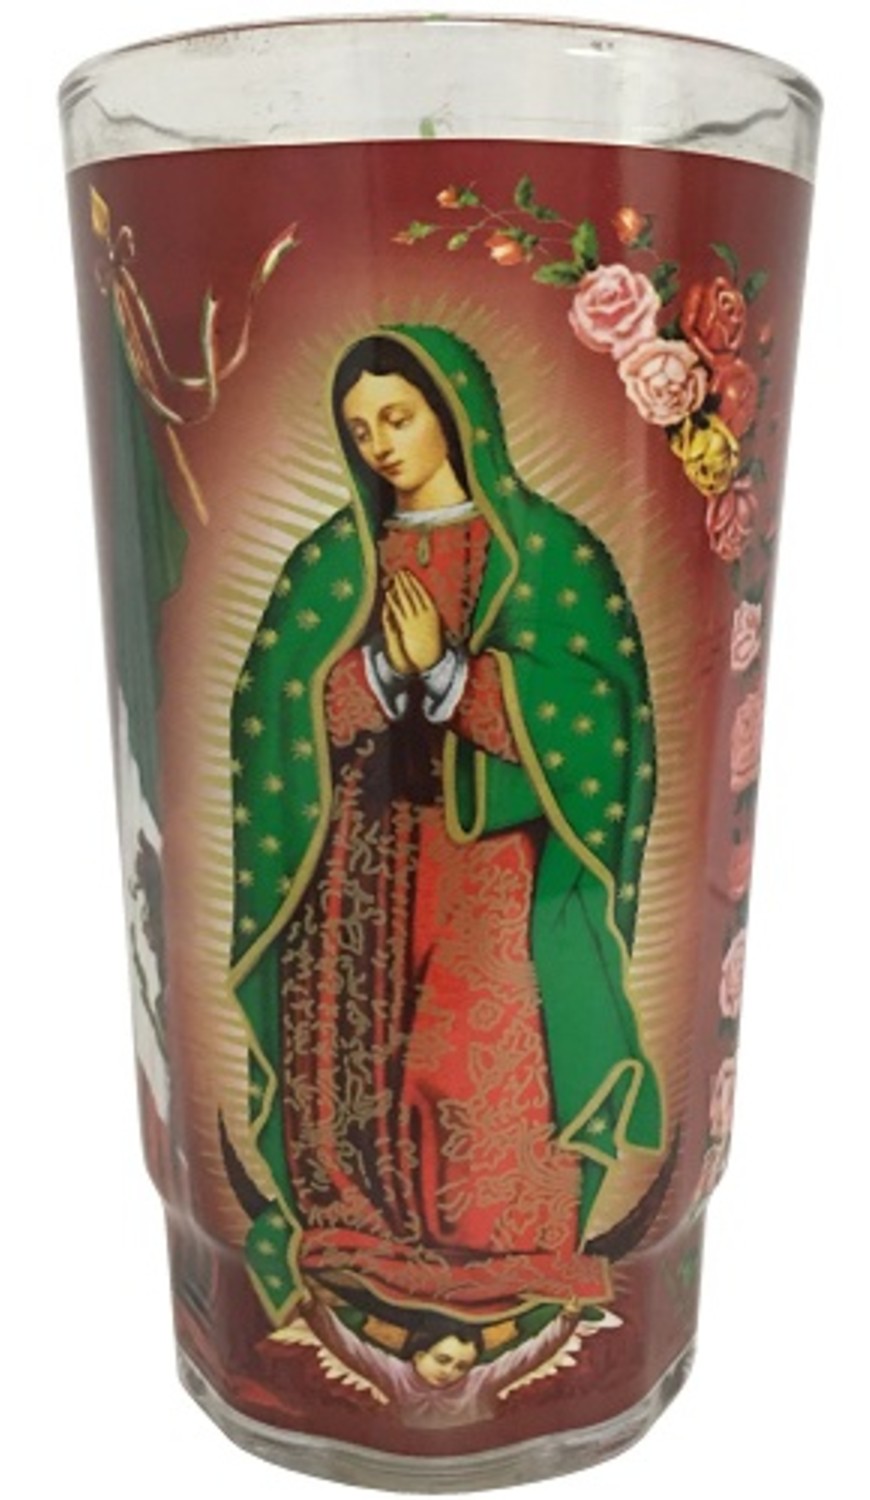 Our Lady of Guadalupe (Ntra, Senora de Guadalupe) Devotional Candle - image 1 of 2